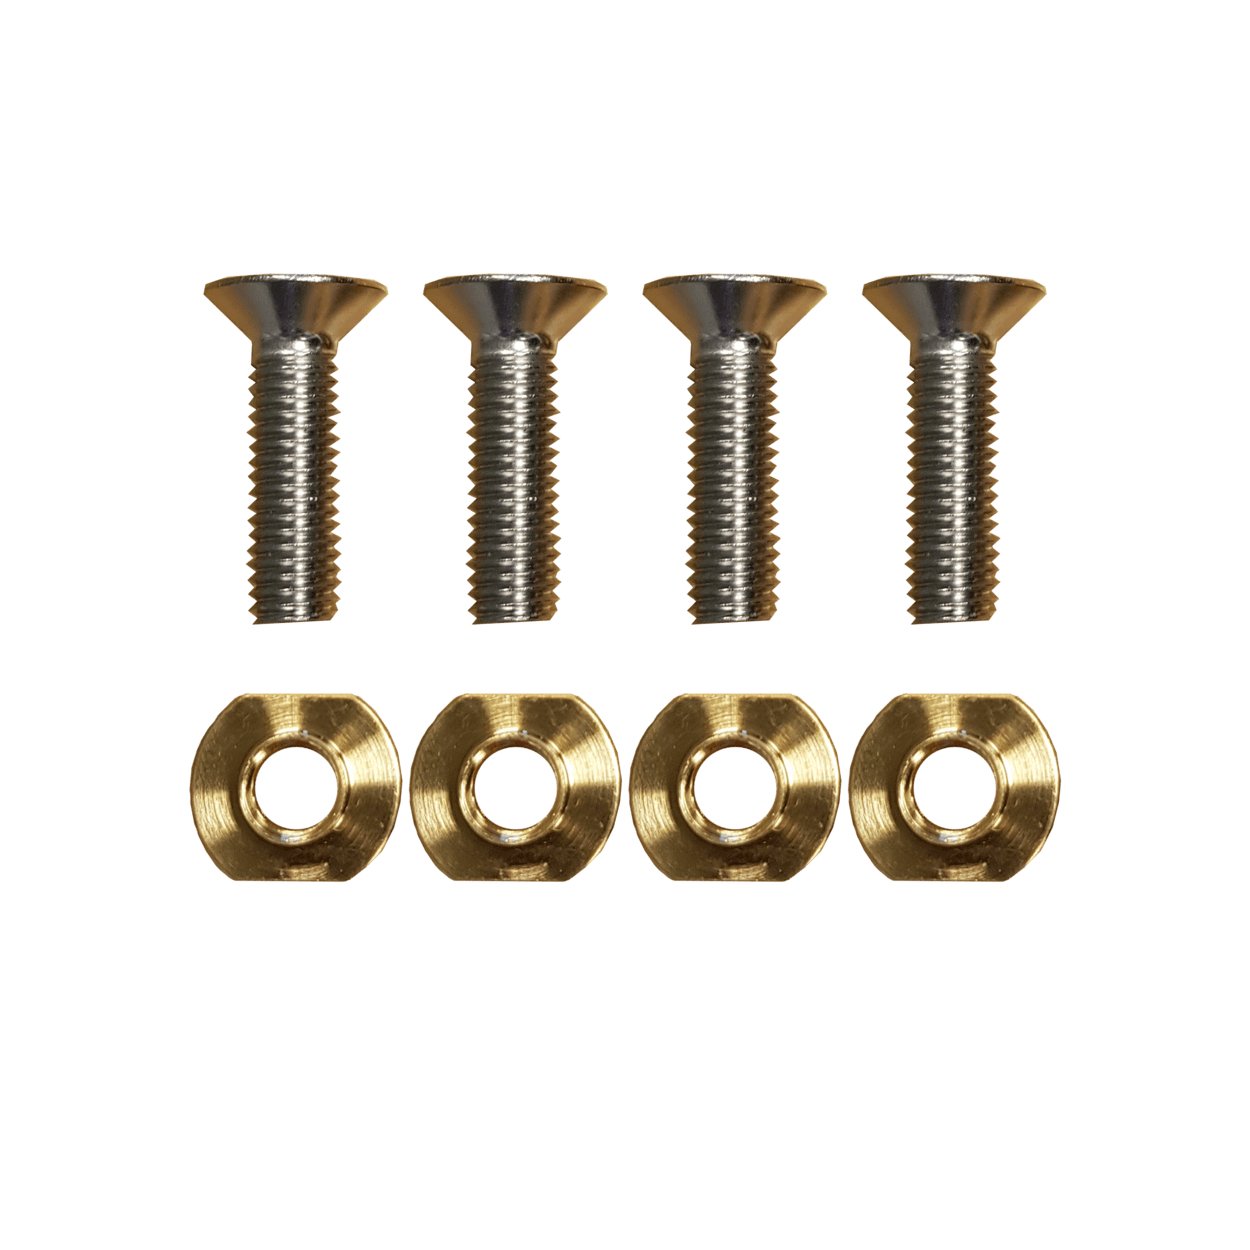 Fanatic X Screw Set Foil Mounting System (incl. nuts) (4pcs) - Worthing Watersports - 9010583066936 - Foilparts - Fanatic X